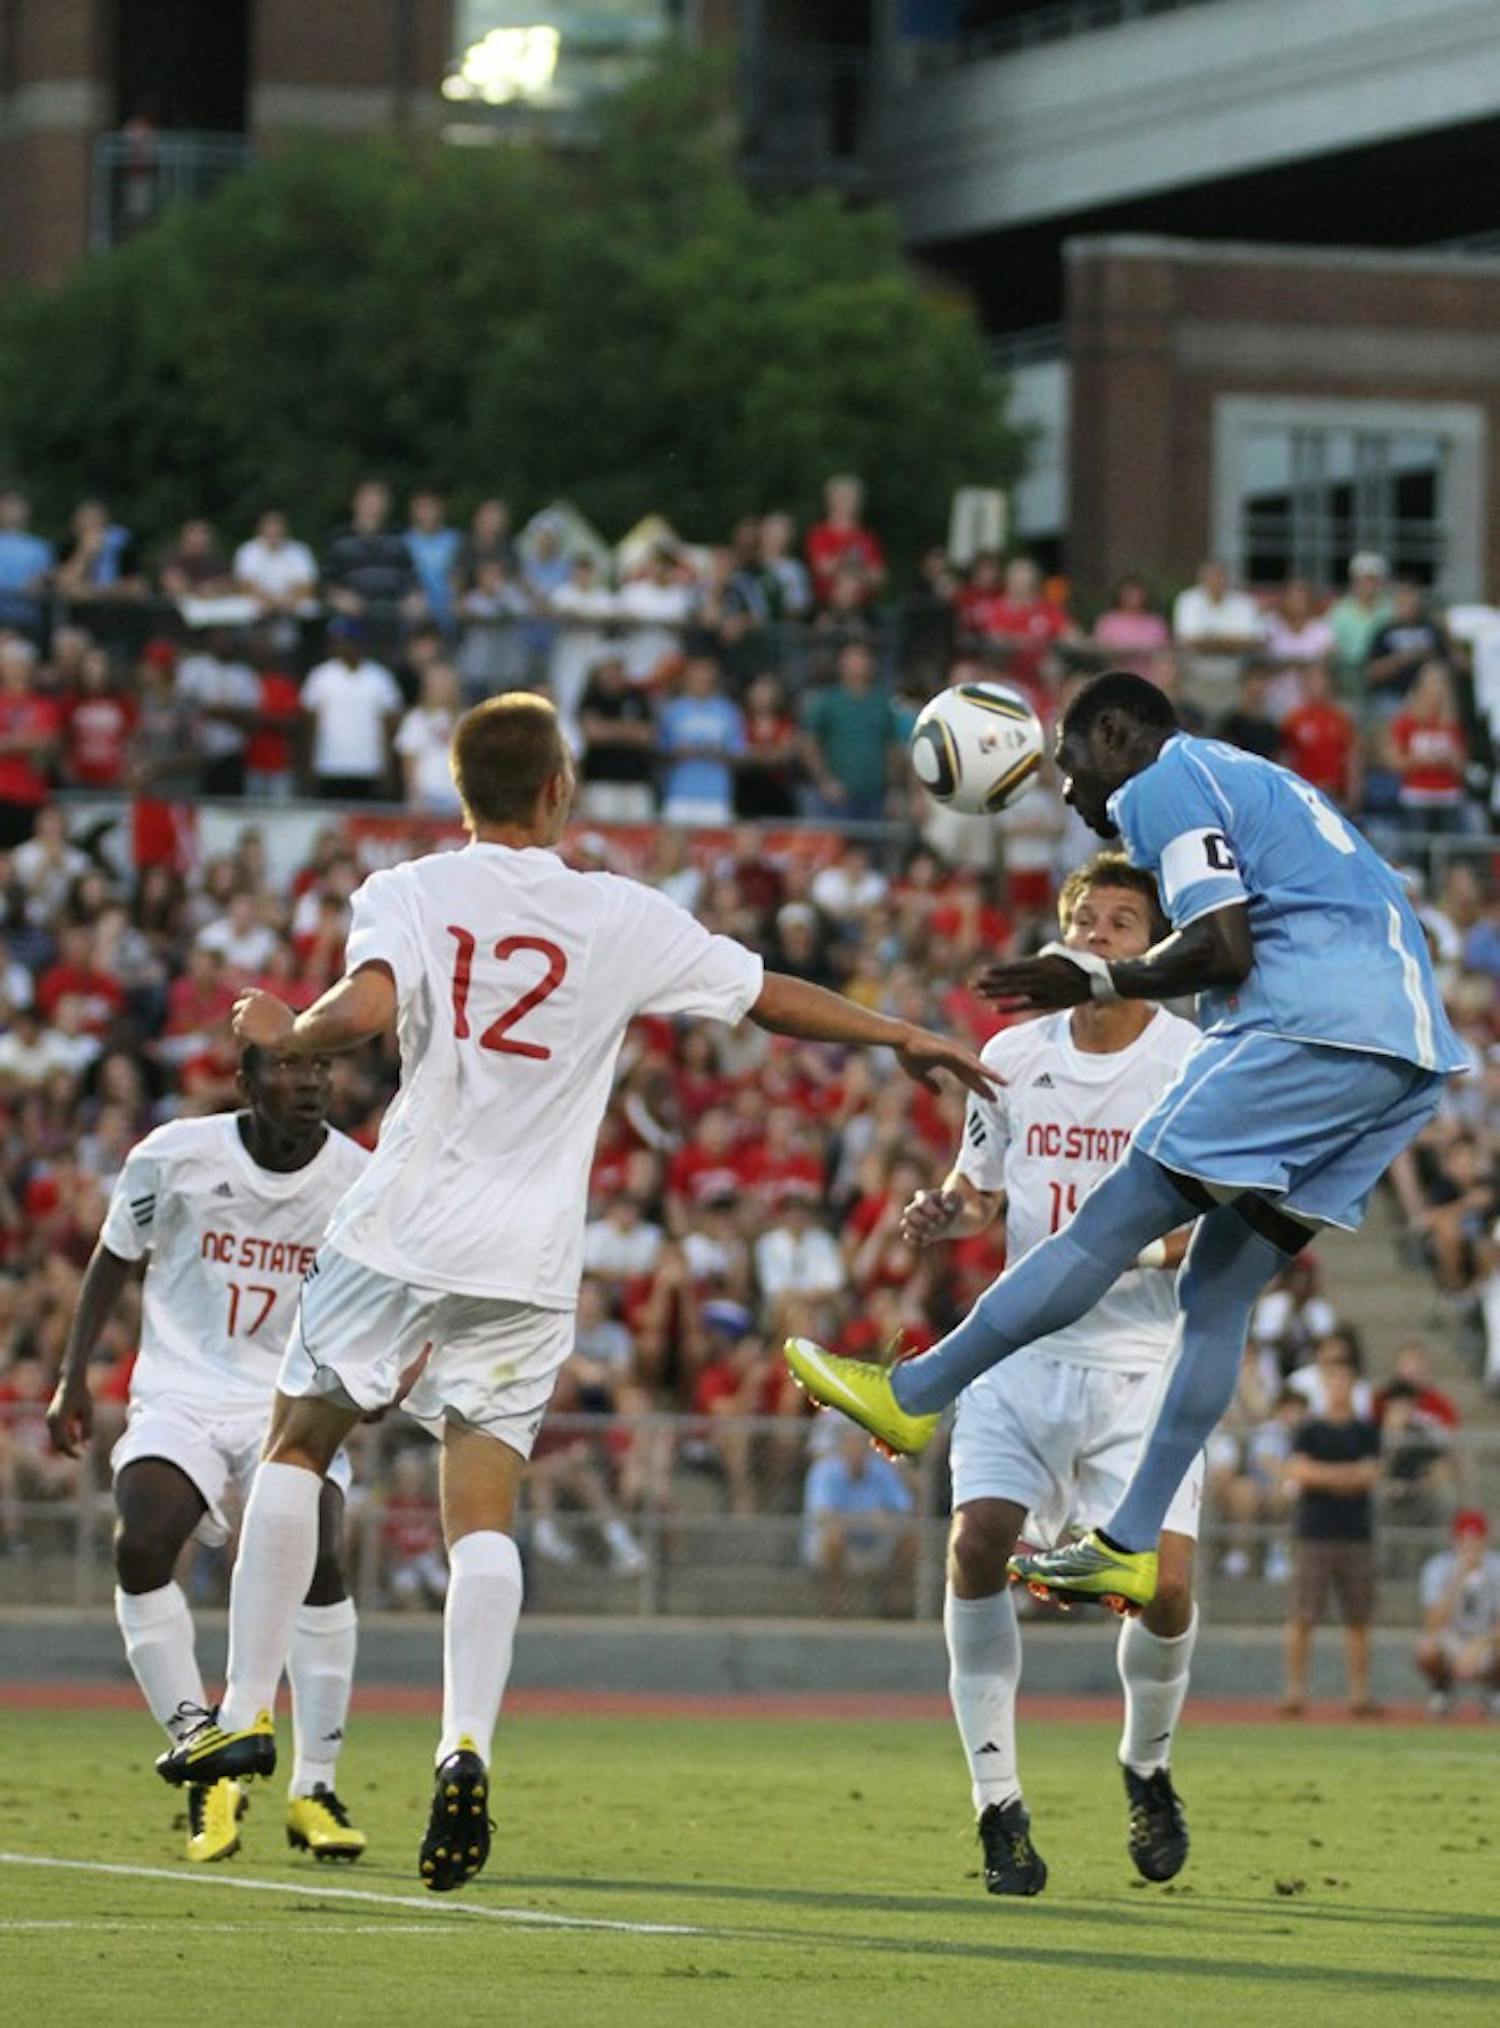 Eddie Ababio adjusted to his new position in the Tar Heels’ attack in place of injured forward Billy Schuler and scored the game’s only goal.